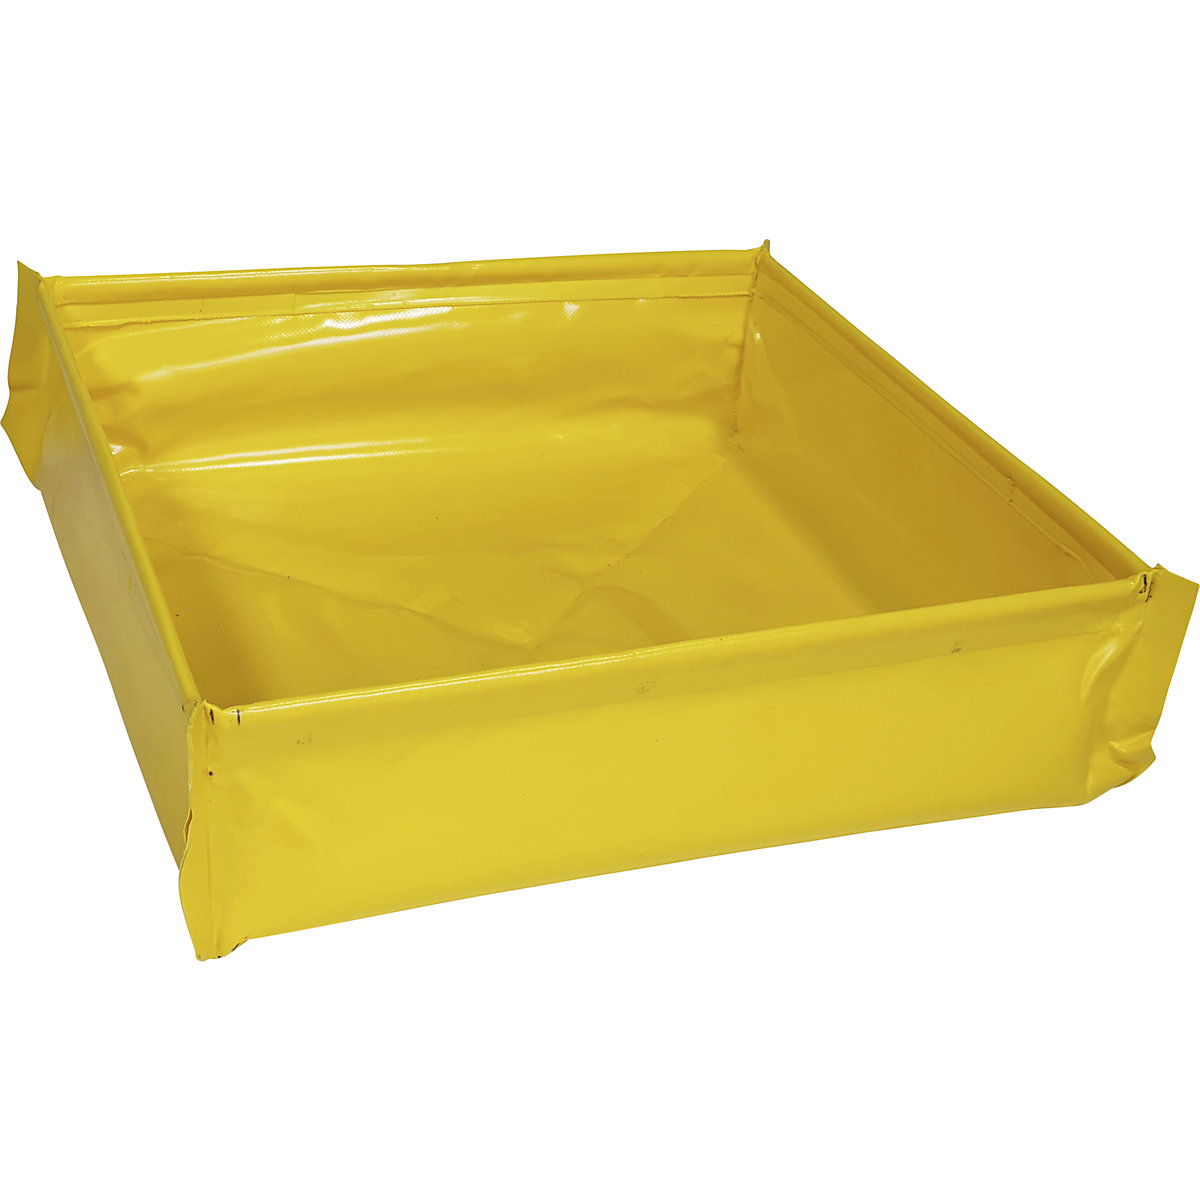 5 Litre Storage Container with Tray